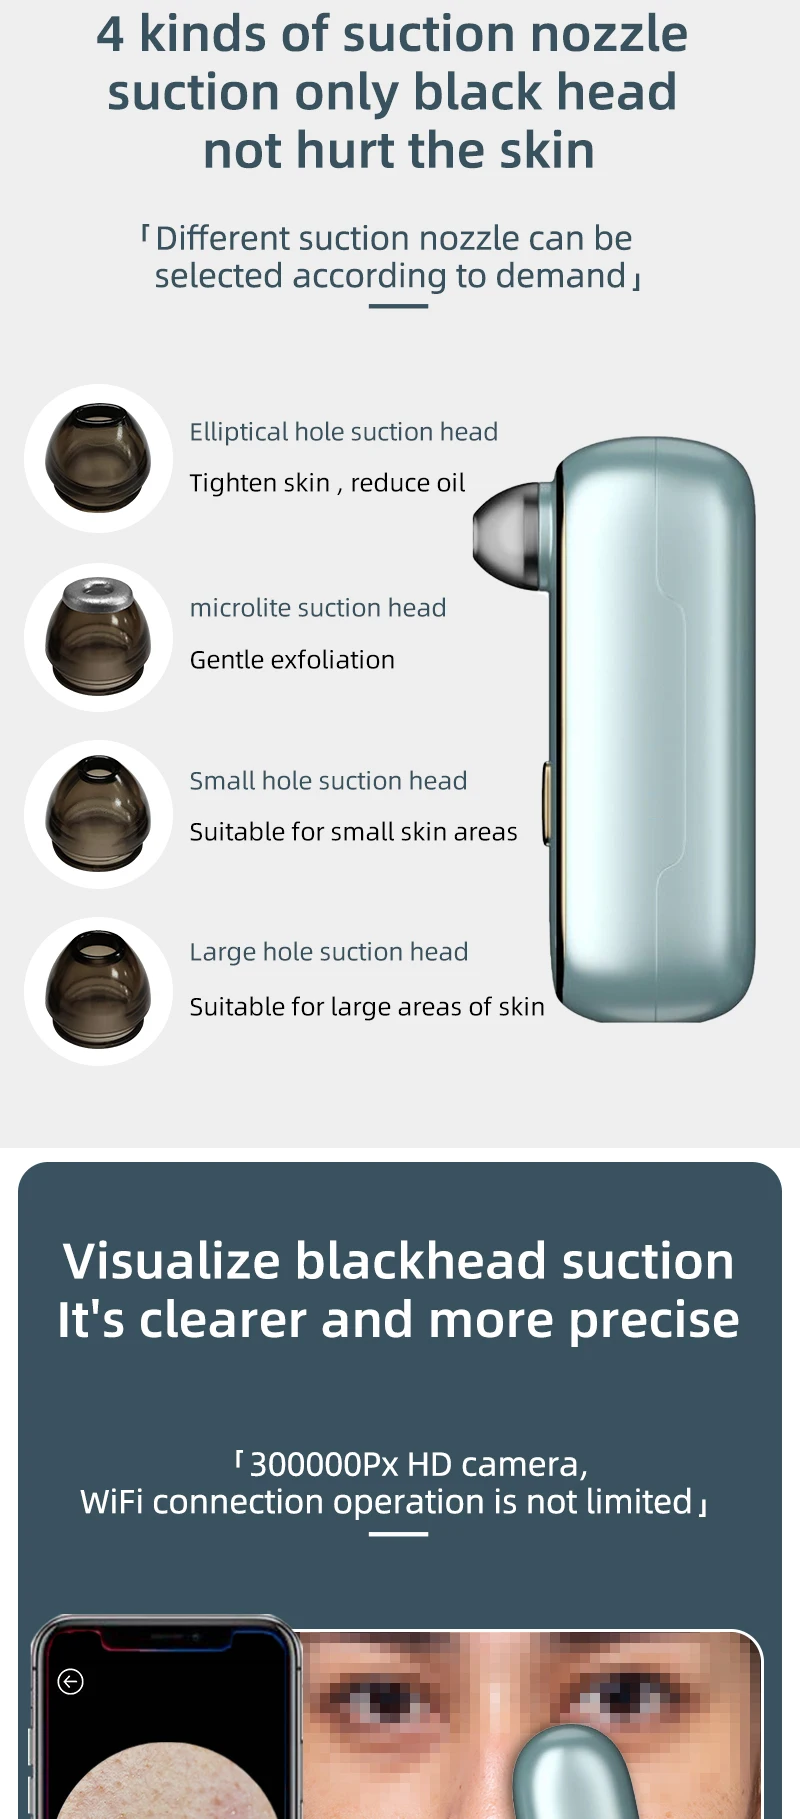 Visible vacuum blackhead removerwith 4 kinds of suction nozzle--electric blackhead remover with 300,000 cameras